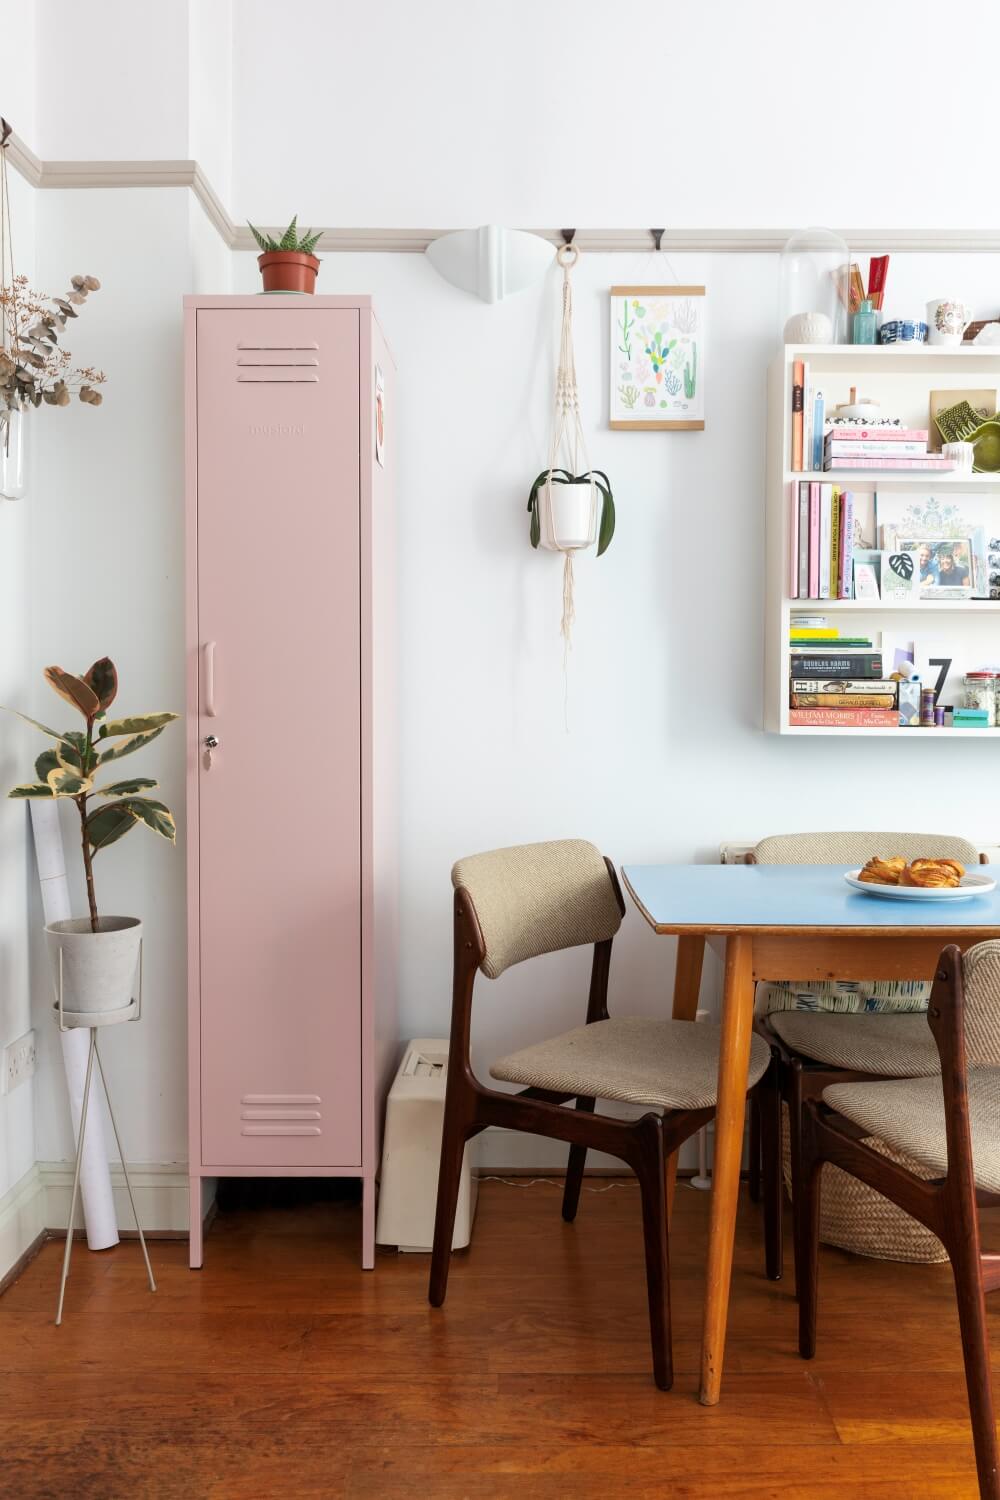 pink Mustard locker in the living room for extra storage next to dining table